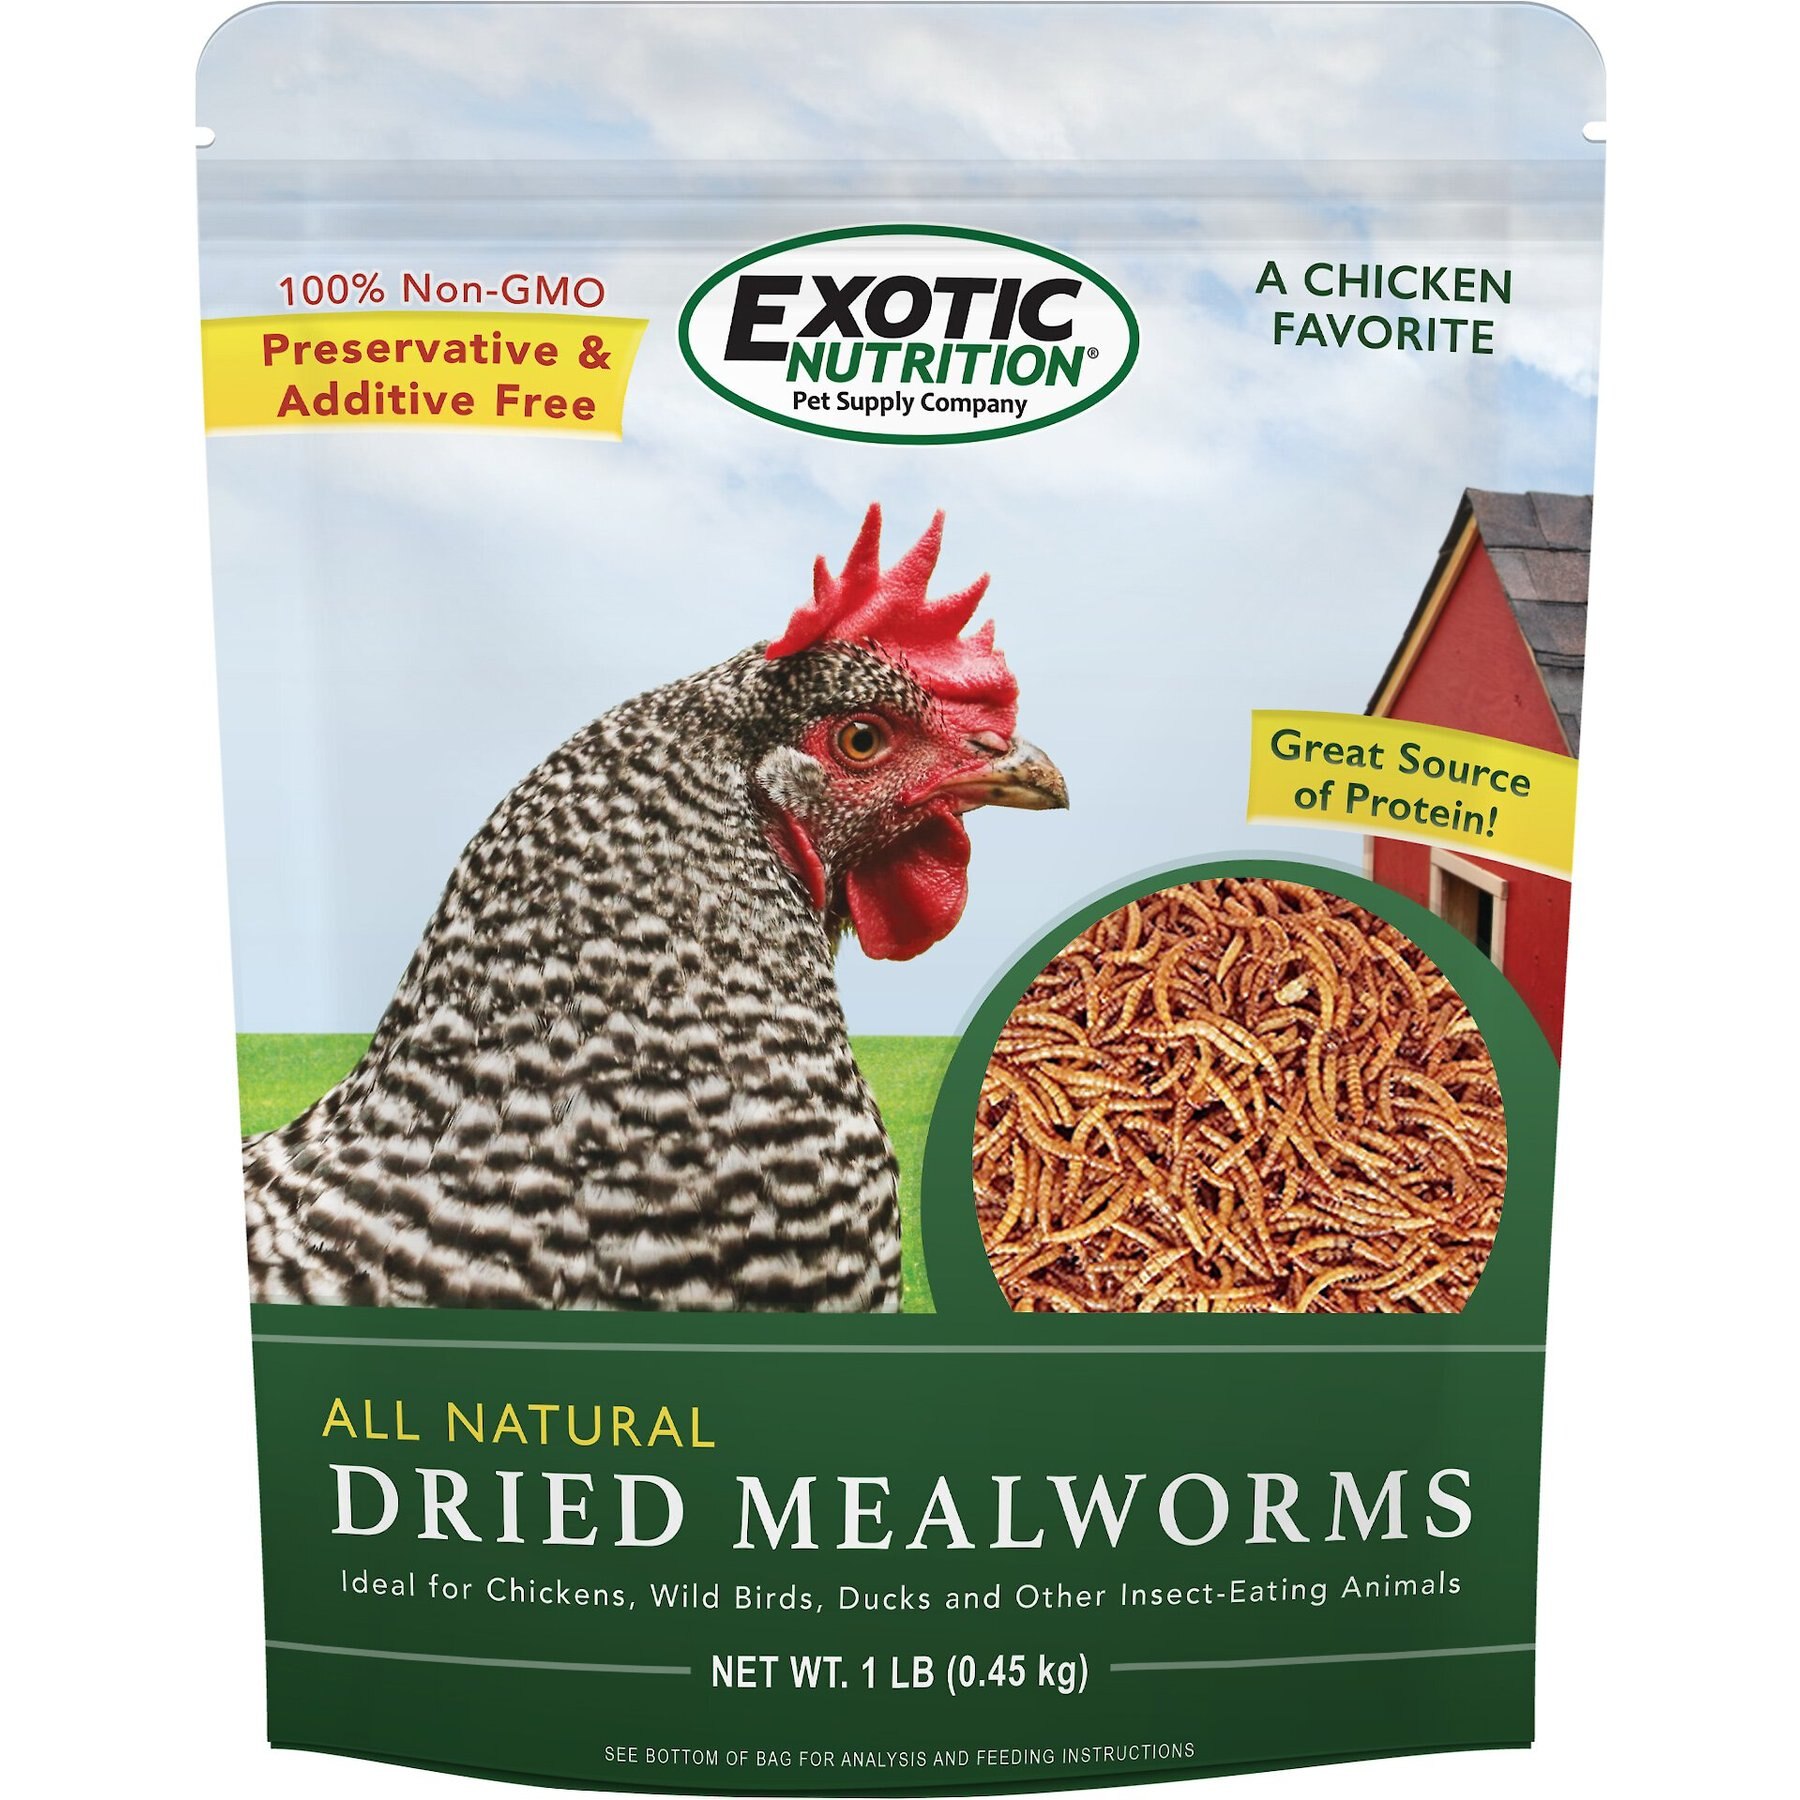 Live Mealworms - Bluebirds, Reptiles & Chicken Feed